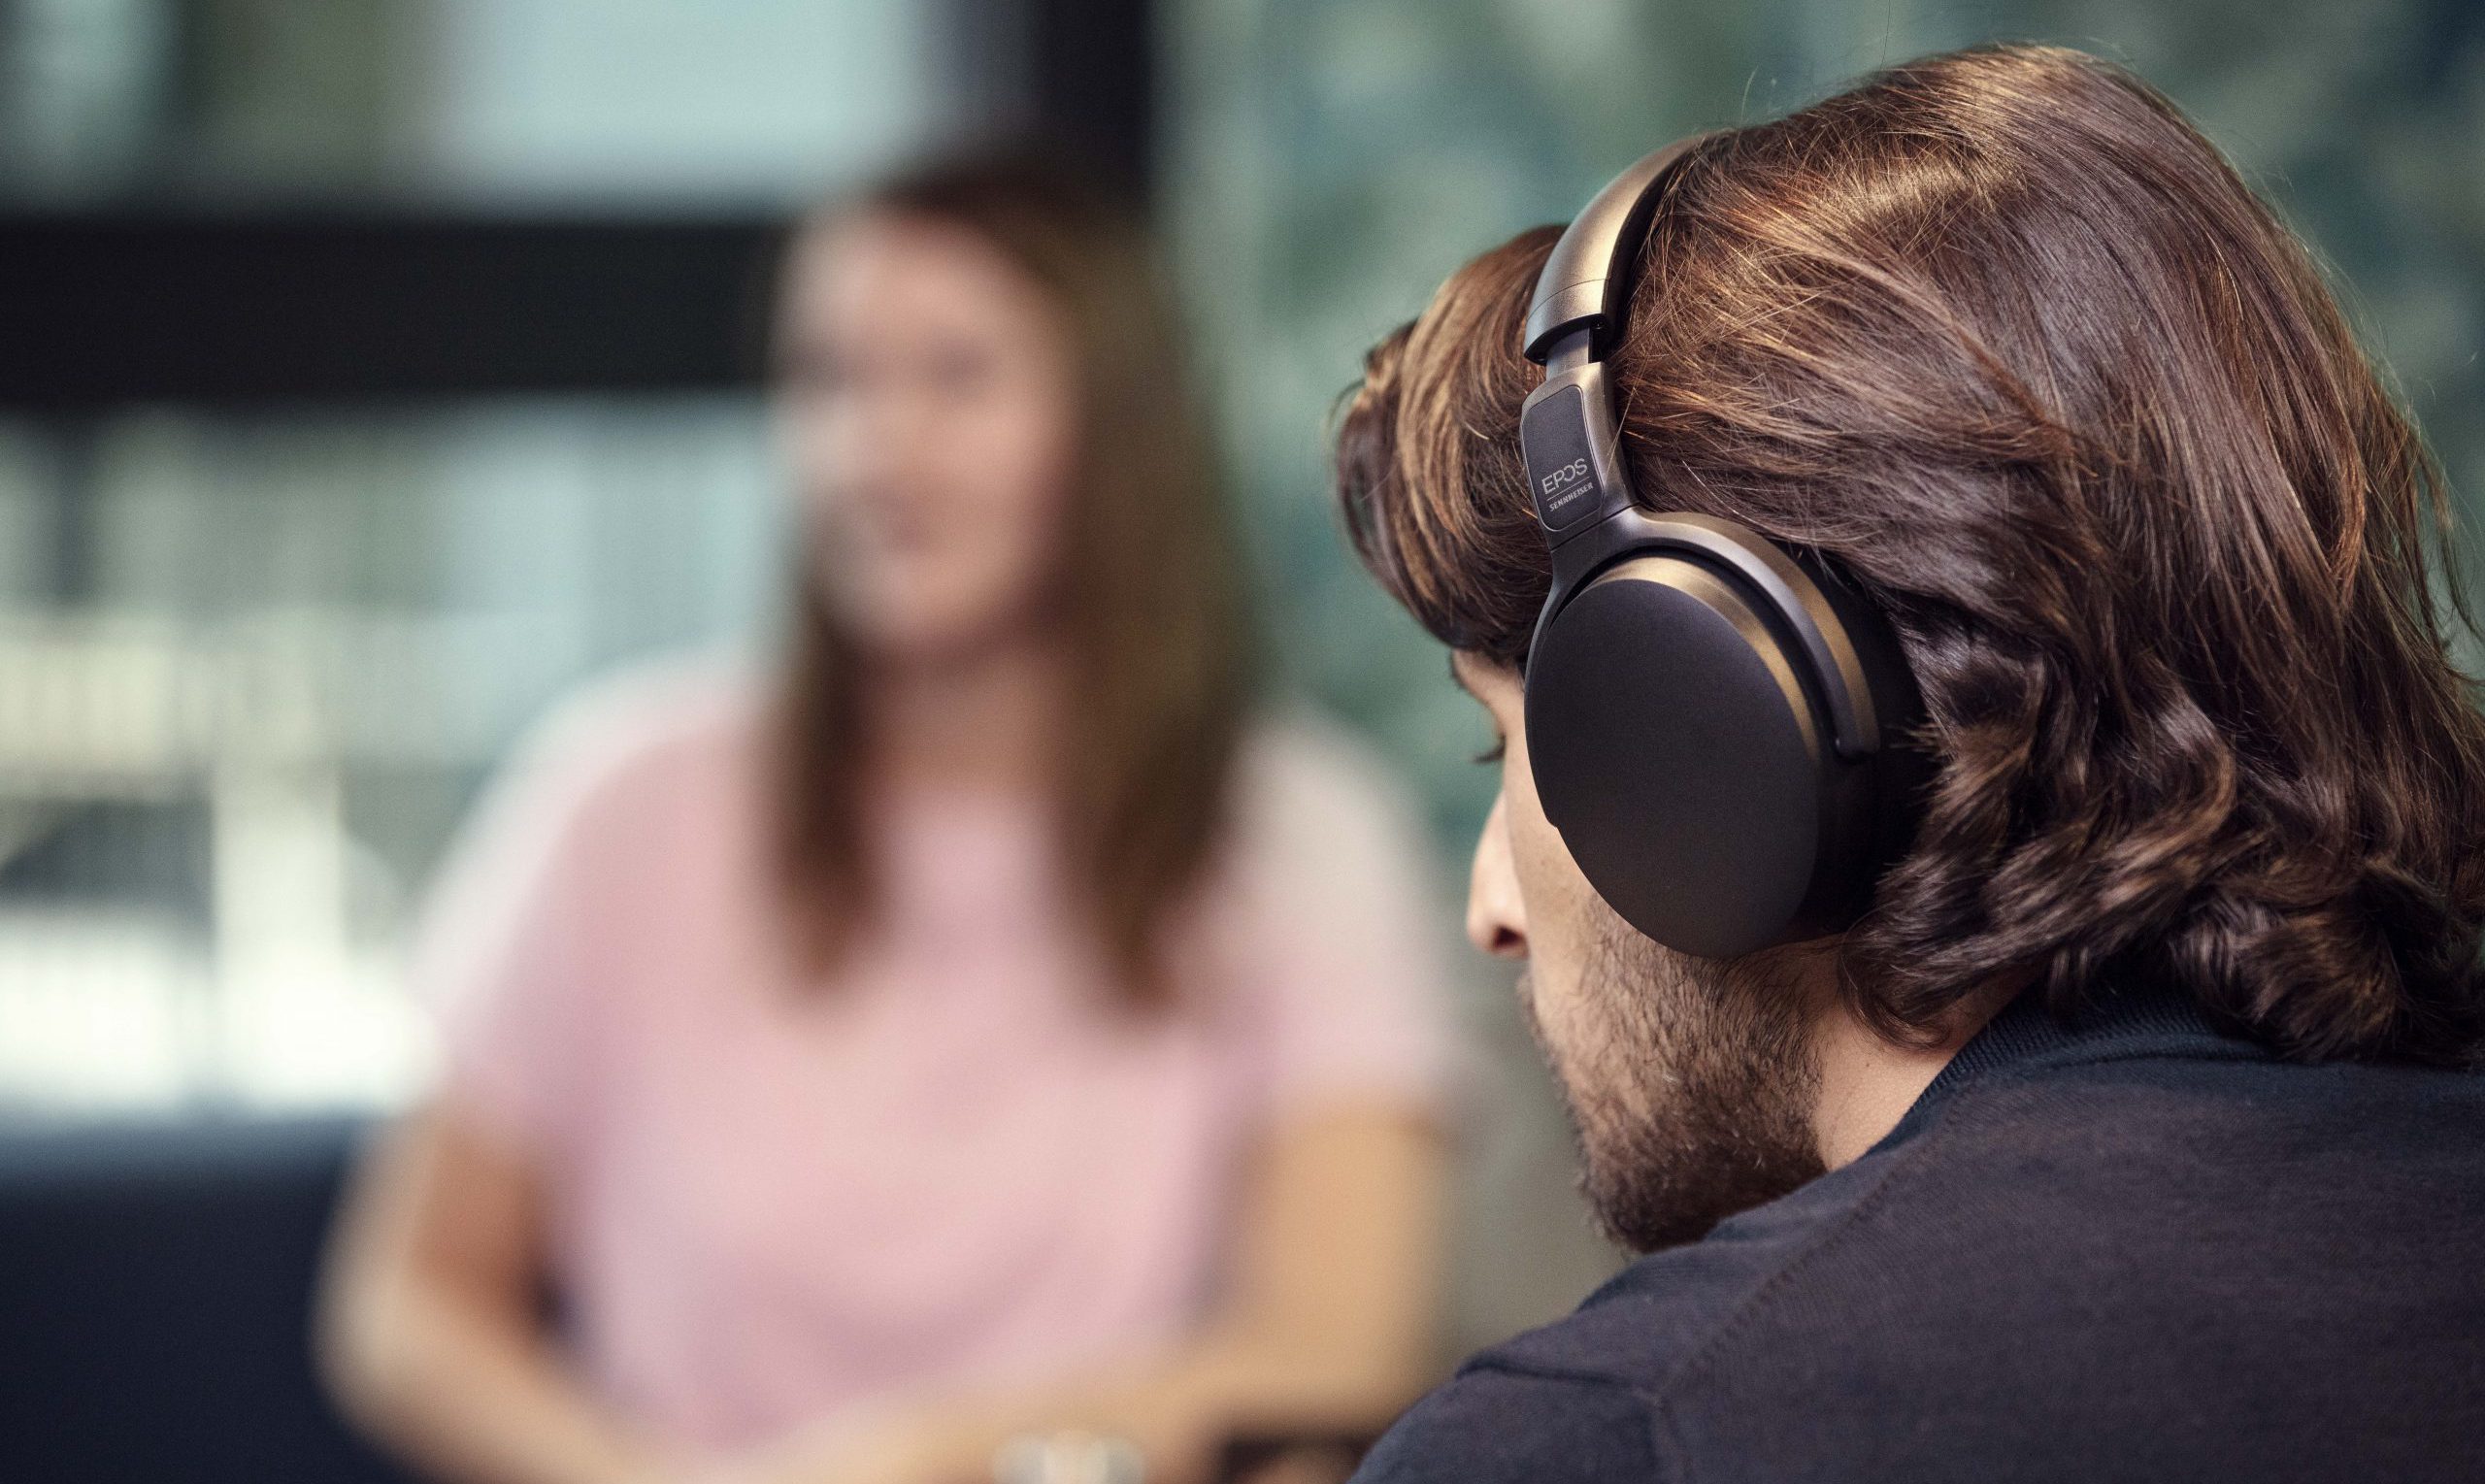 Man using headsets to concentrate in busy area